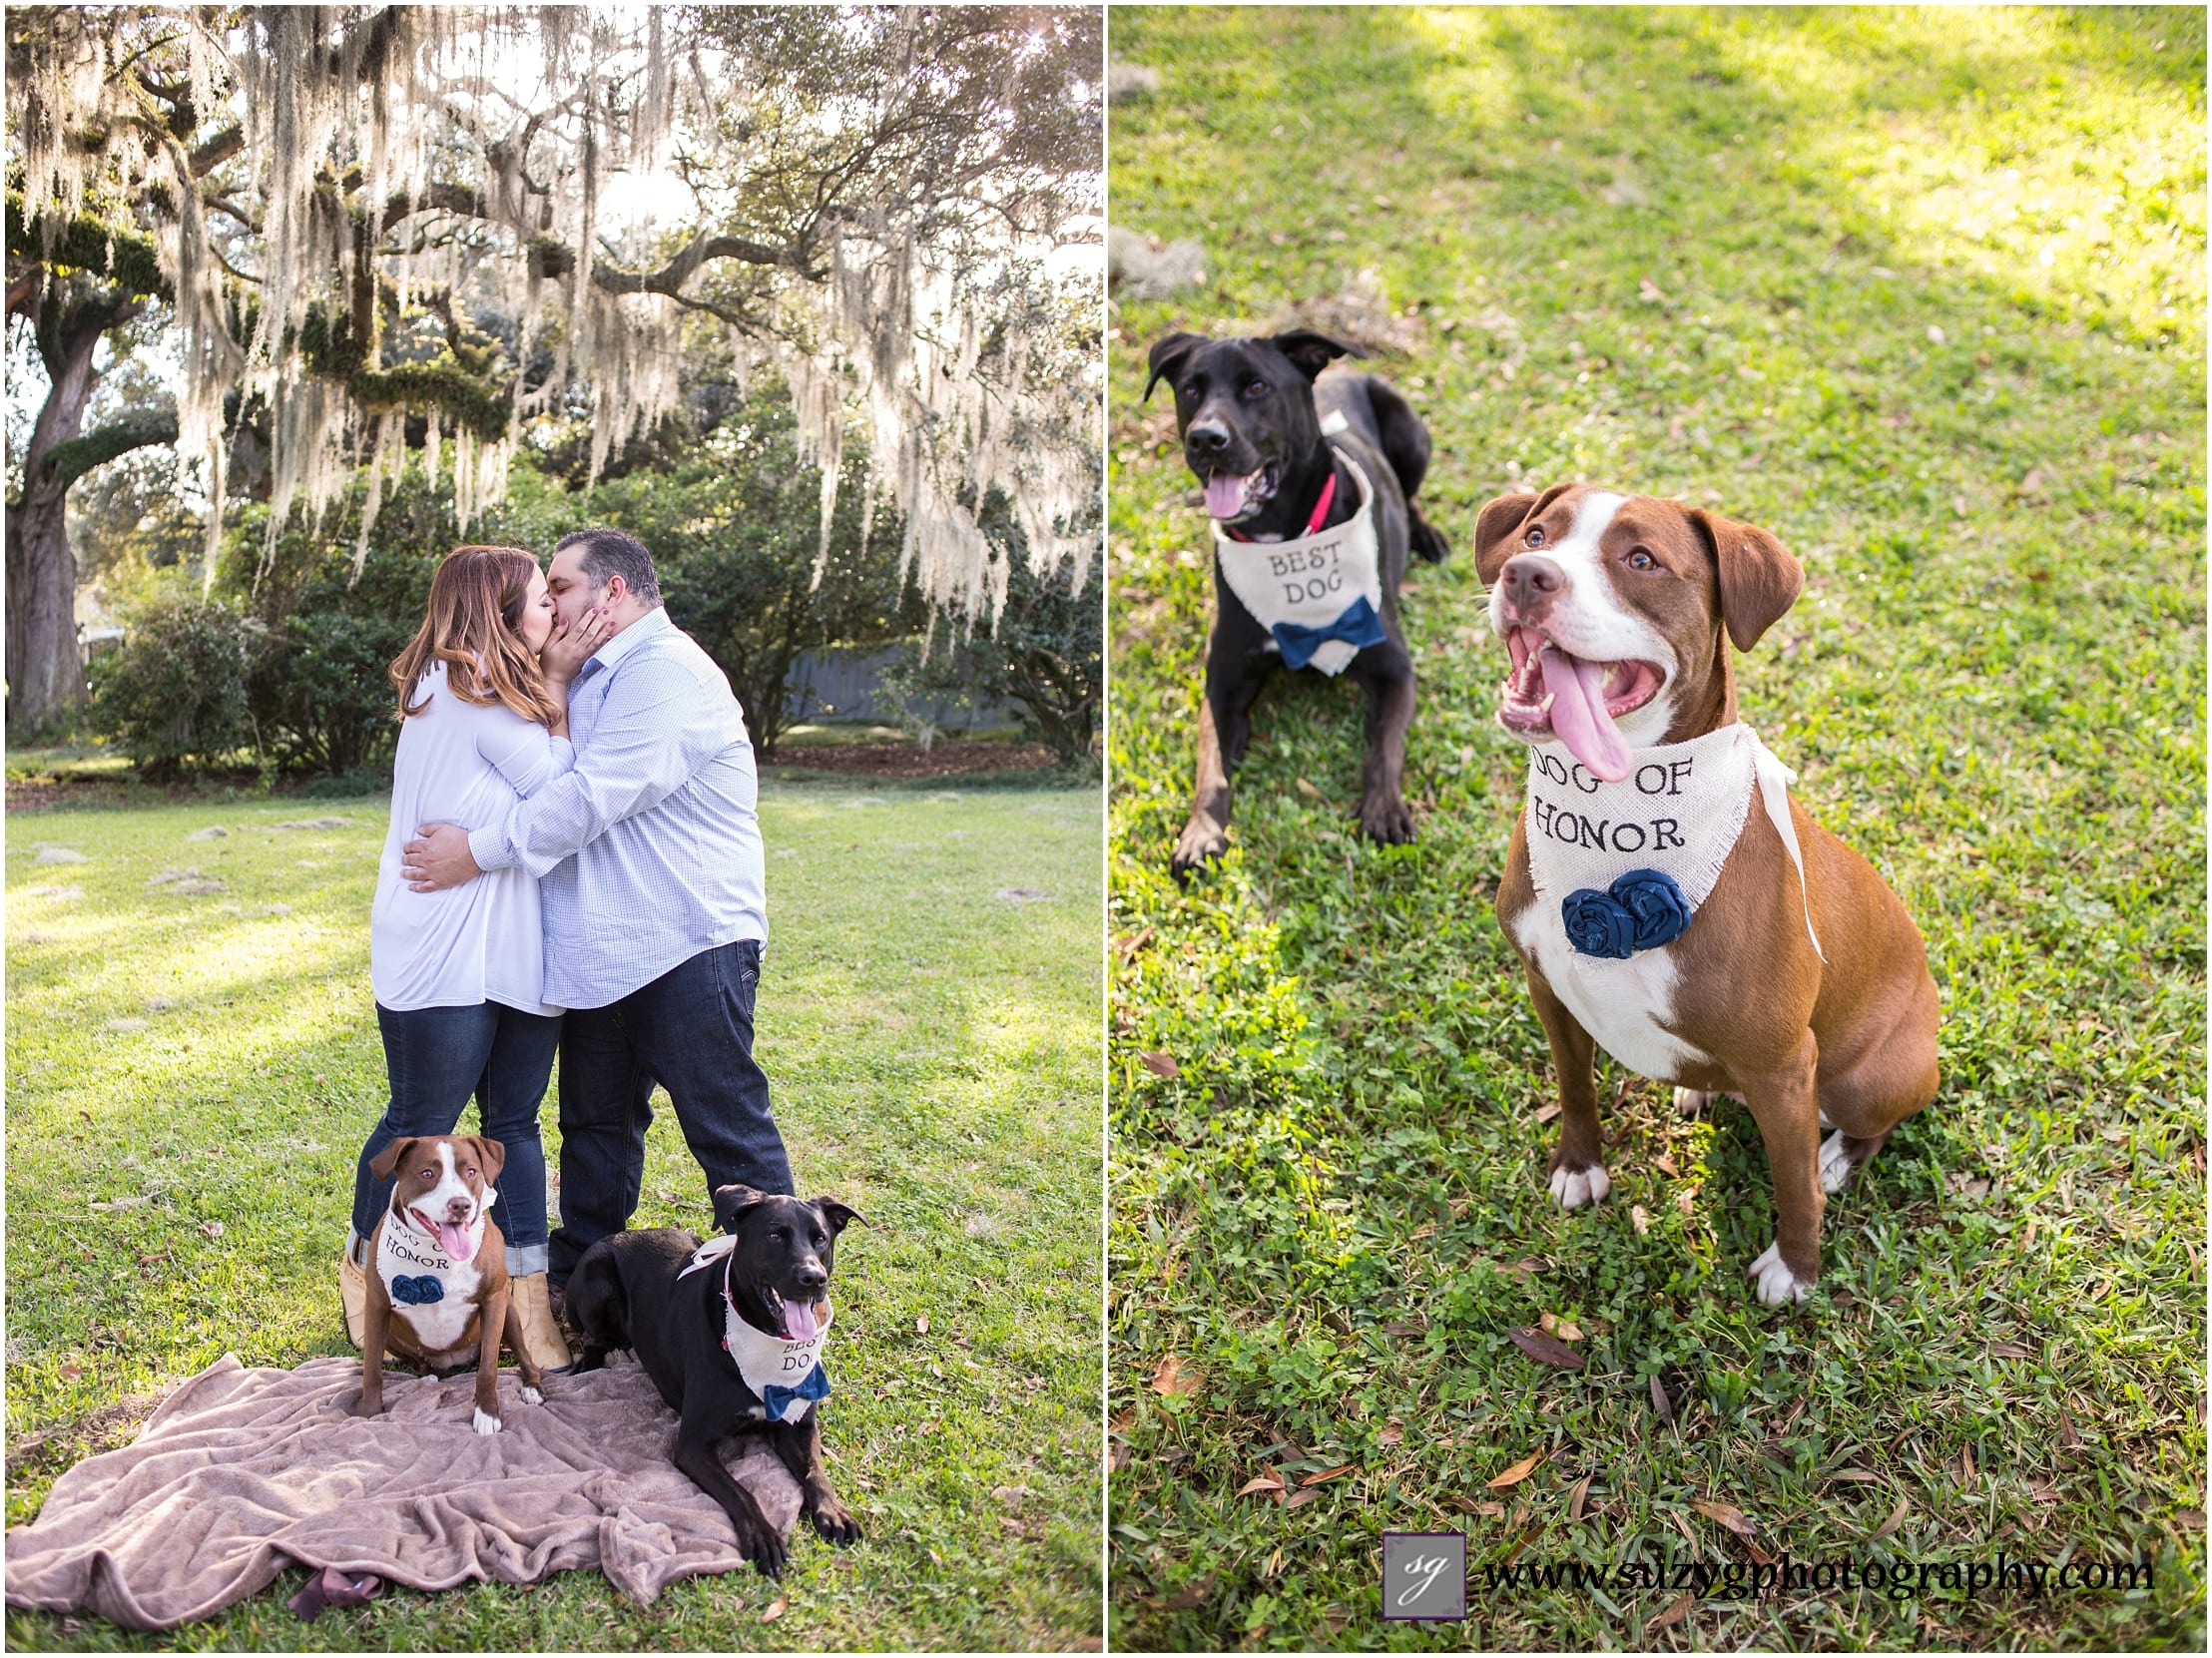 Engagement Session- New Orleans-louisiana wedding photographer-wedding photography-suzy-g-photography-weddings_0012